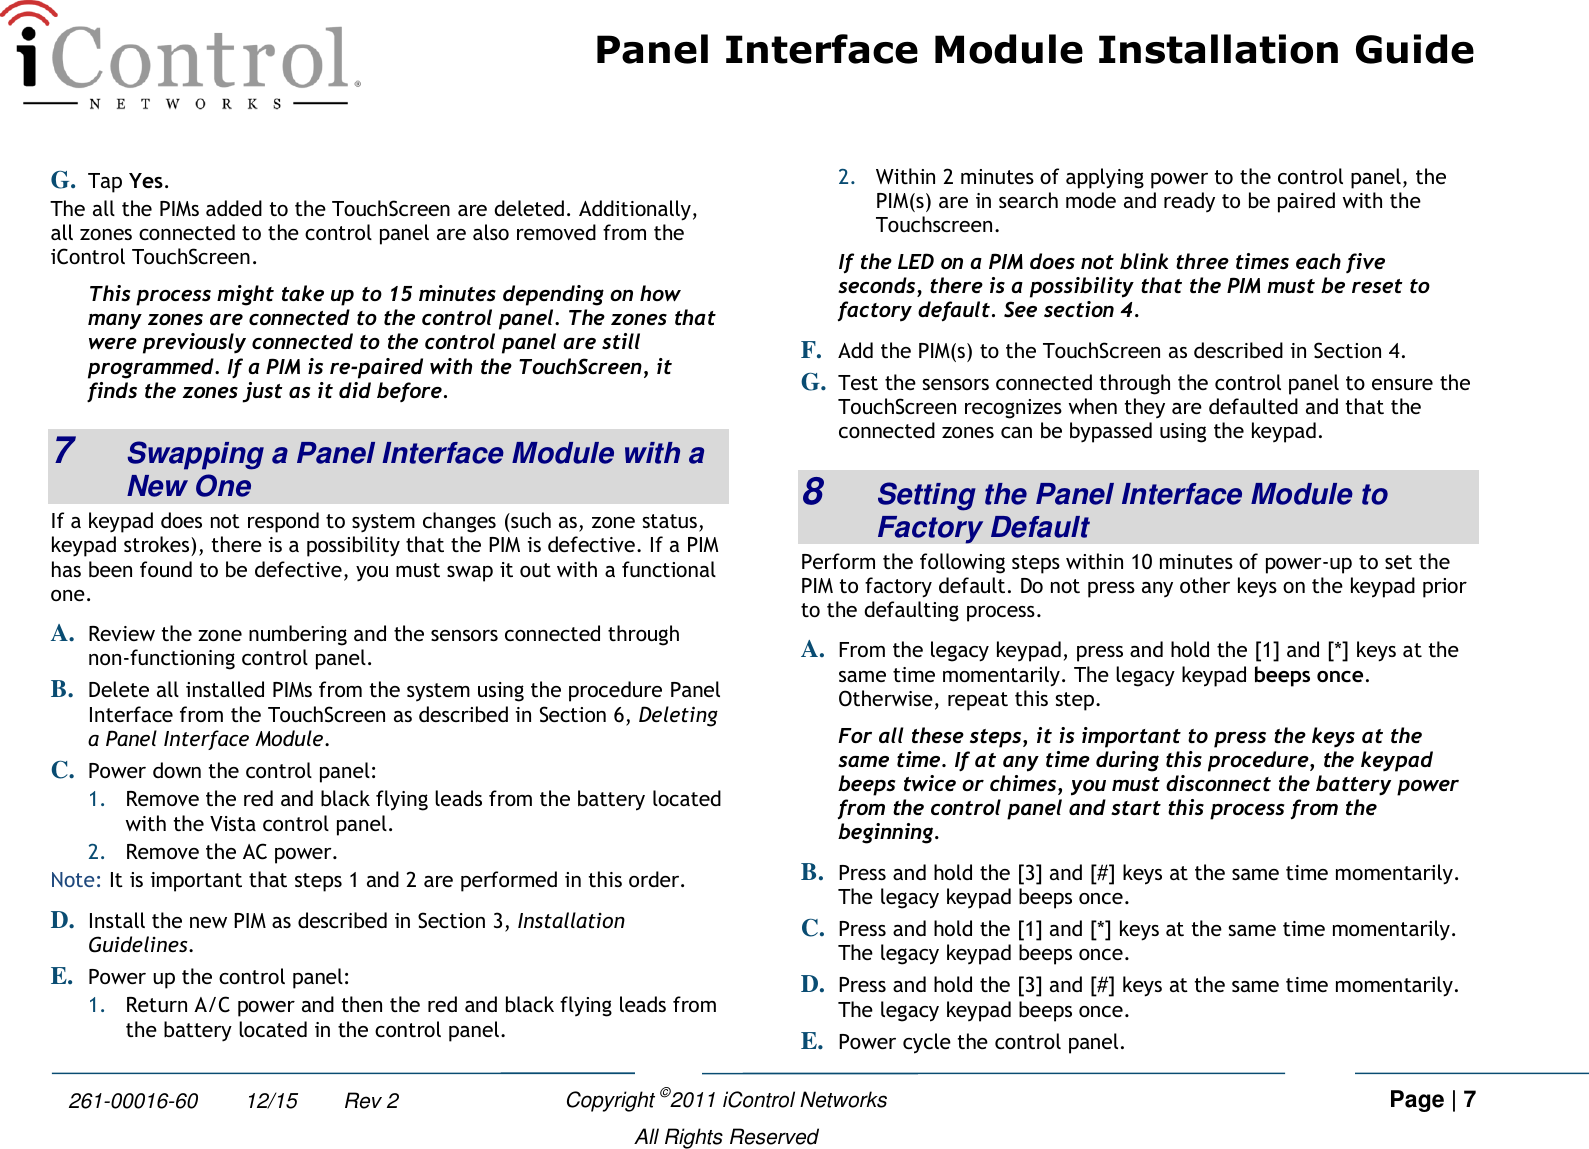 Panel Interface Module Installation Guide    Copyright ©2011 iControl Networks   Page | 7  All Rights Reserved 261-00016-60        12/15        Rev 2 G. Tap Yes. The all the PIMs added to the TouchScreen are deleted. Additionally, all zones connected to the control panel are also removed from the iControl TouchScreen. This process might take up to 15 minutes depending on how many zones are connected to the control panel. The zones that were previously connected to the control panel are still programmed. If a PIM is re-paired with the TouchScreen, it finds the zones just as it did before. 7  Swapping a Panel Interface Module with a New One If a keypad does not respond to system changes (such as, zone status, keypad strokes), there is a possibility that the PIM is defective. If a PIM has been found to be defective, you must swap it out with a functional one. A. Review the zone numbering and the sensors connected through non-functioning control panel. B. Delete all installed PIMs from the system using the procedure Panel Interface from the TouchScreen as described in Section 6, Deleting a Panel Interface Module. C. Power down the control panel: 1. Remove the red and black flying leads from the battery located with the Vista control panel. 2. Remove the AC power. Note: It is important that steps 1 and 2 are performed in this order. D. Install the new PIM as described in Section 3, Installation Guidelines. E. Power up the control panel: 1. Return A/C power and then the red and black flying leads from the battery located in the control panel. 2. Within 2 minutes of applying power to the control panel, the PIM(s) are in search mode and ready to be paired with the Touchscreen.  If the LED on a PIM does not blink three times each five seconds, there is a possibility that the PIM must be reset to factory default. See section 4. F. Add the PIM(s) to the TouchScreen as described in Section 4. G. Test the sensors connected through the control panel to ensure the TouchScreen recognizes when they are defaulted and that the connected zones can be bypassed using the keypad. 8  Setting the Panel Interface Module to Factory Default Perform the following steps within 10 minutes of power-up to set the PIM to factory default. Do not press any other keys on the keypad prior to the defaulting process. A. From the legacy keypad, press and hold the [1] and [*] keys at the same time momentarily. The legacy keypad beeps once. Otherwise, repeat this step. For all these steps, it is important to press the keys at the same time. If at any time during this procedure, the keypad beeps twice or chimes, you must disconnect the battery power from the control panel and start this process from the beginning. B. Press and hold the [3] and [#] keys at the same time momentarily. The legacy keypad beeps once.  C. Press and hold the [1] and [*] keys at the same time momentarily. The legacy keypad beeps once.  D. Press and hold the [3] and [#] keys at the same time momentarily. The legacy keypad beeps once. E. Power cycle the control panel. 